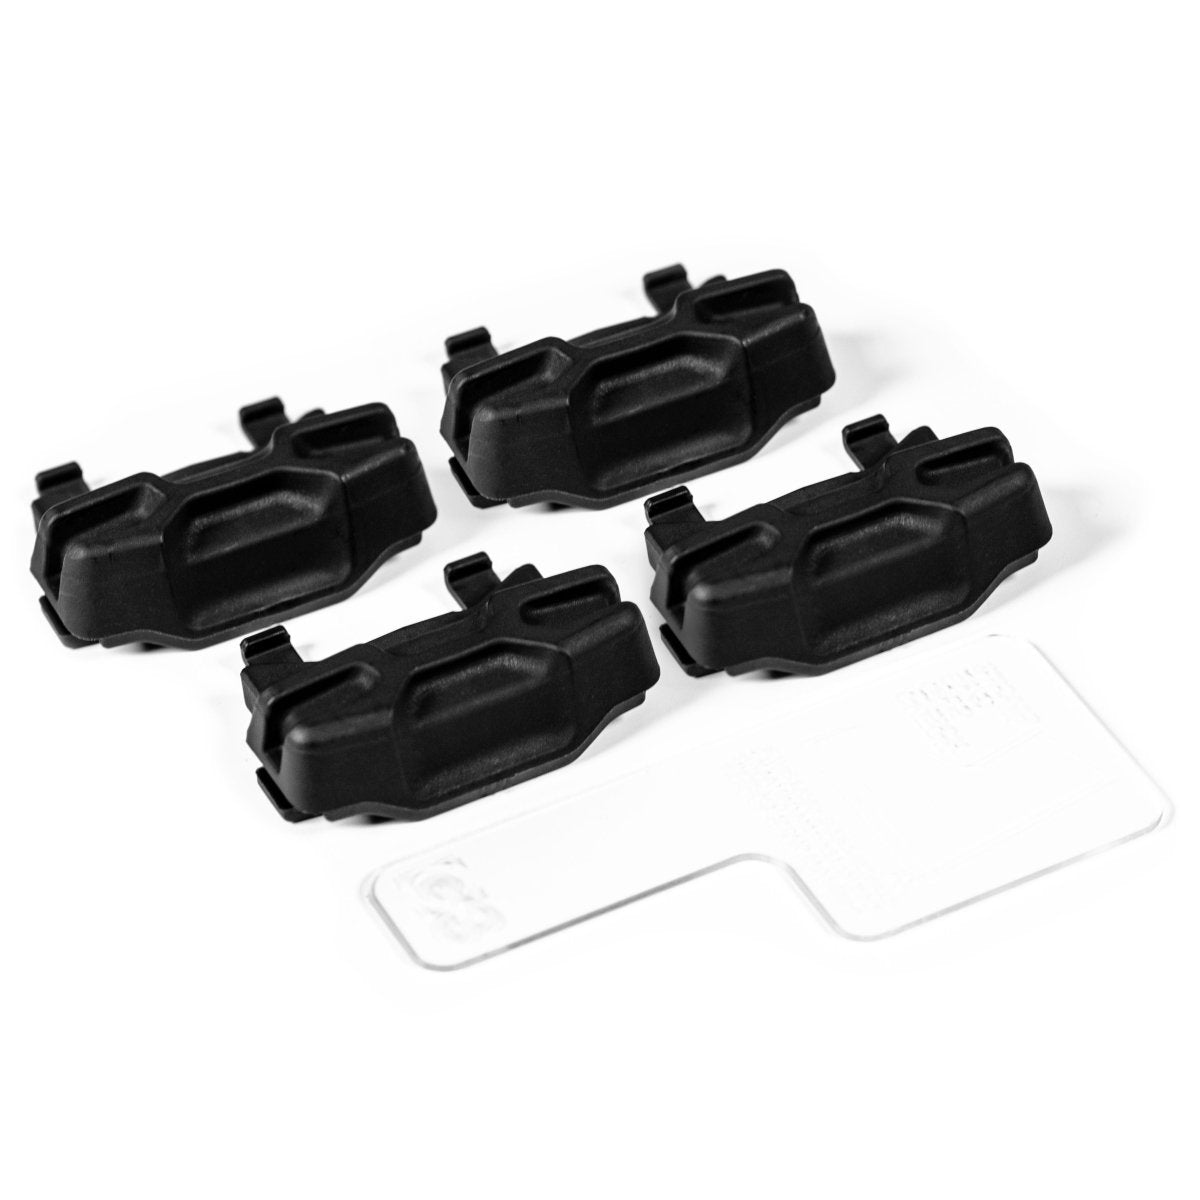 ZED Freeride Stomp Pad Kit - Accessories - G3 Store [CAD]